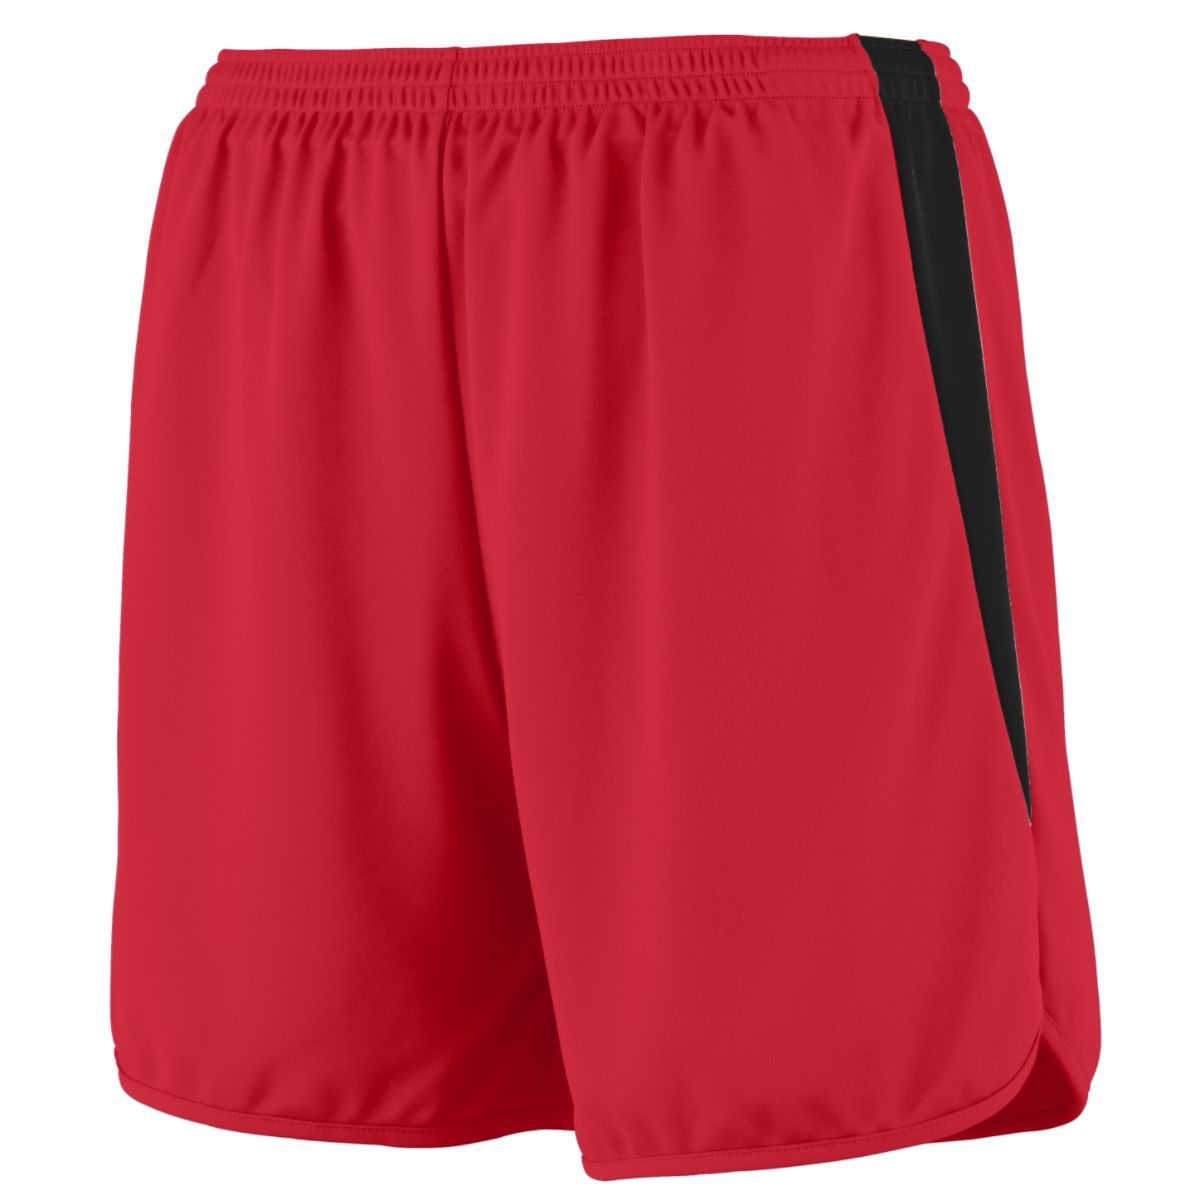 Augusta Sportswear Youth Rapidpace Track Shorts in Red/Black  -Part of the Youth, Youth-Shorts, Augusta-Products, Track-Field product lines at KanaleyCreations.com